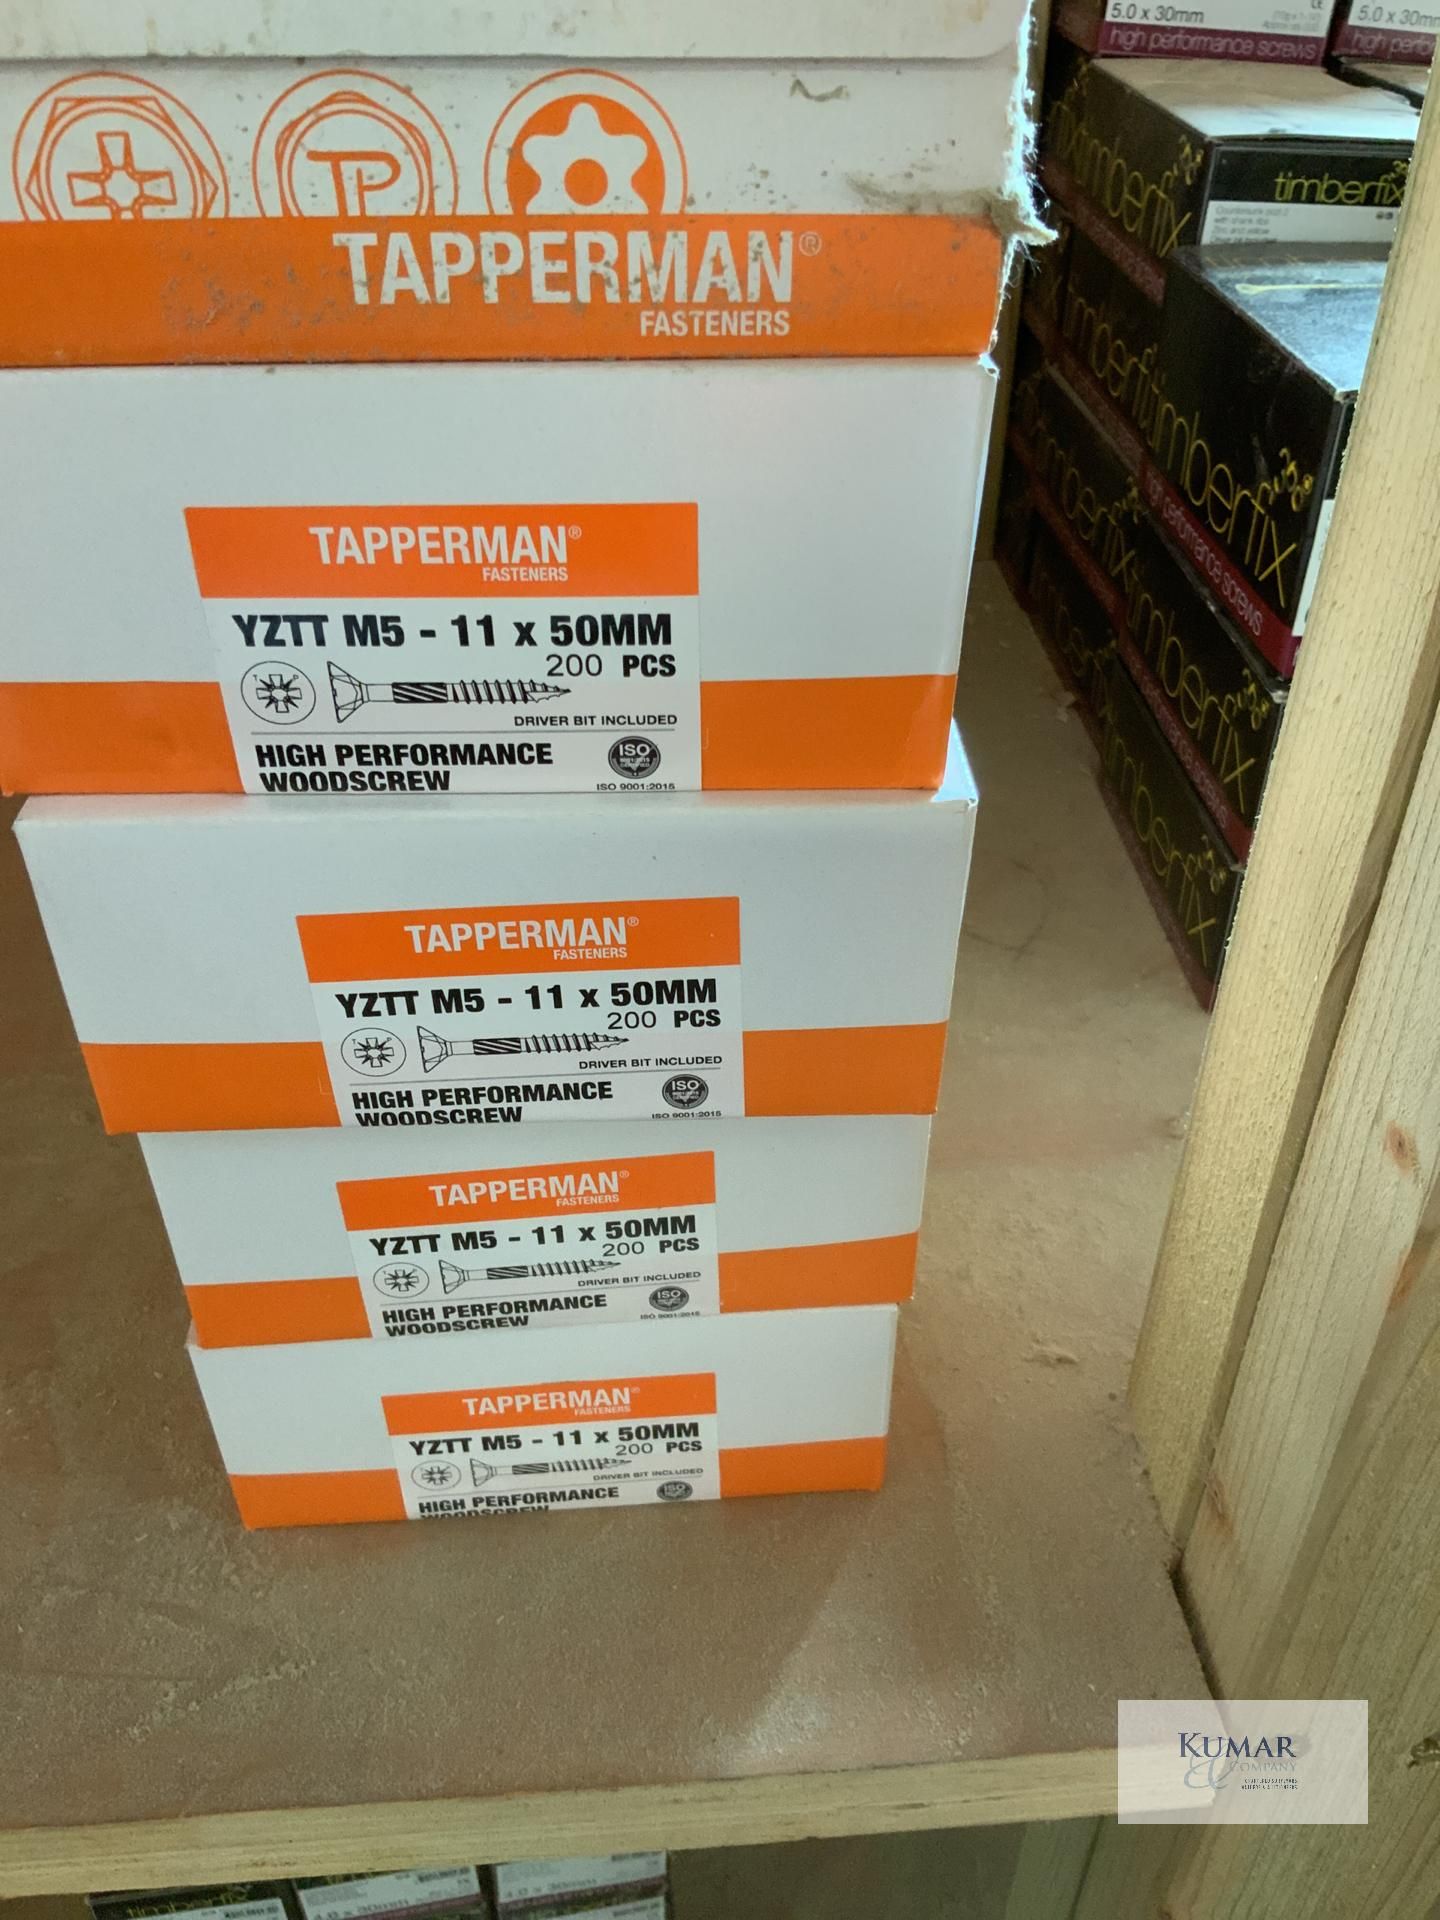 Approx 21 Boxes - M5 11 x 50mm Tapperman Wood Screws - Image 4 of 4